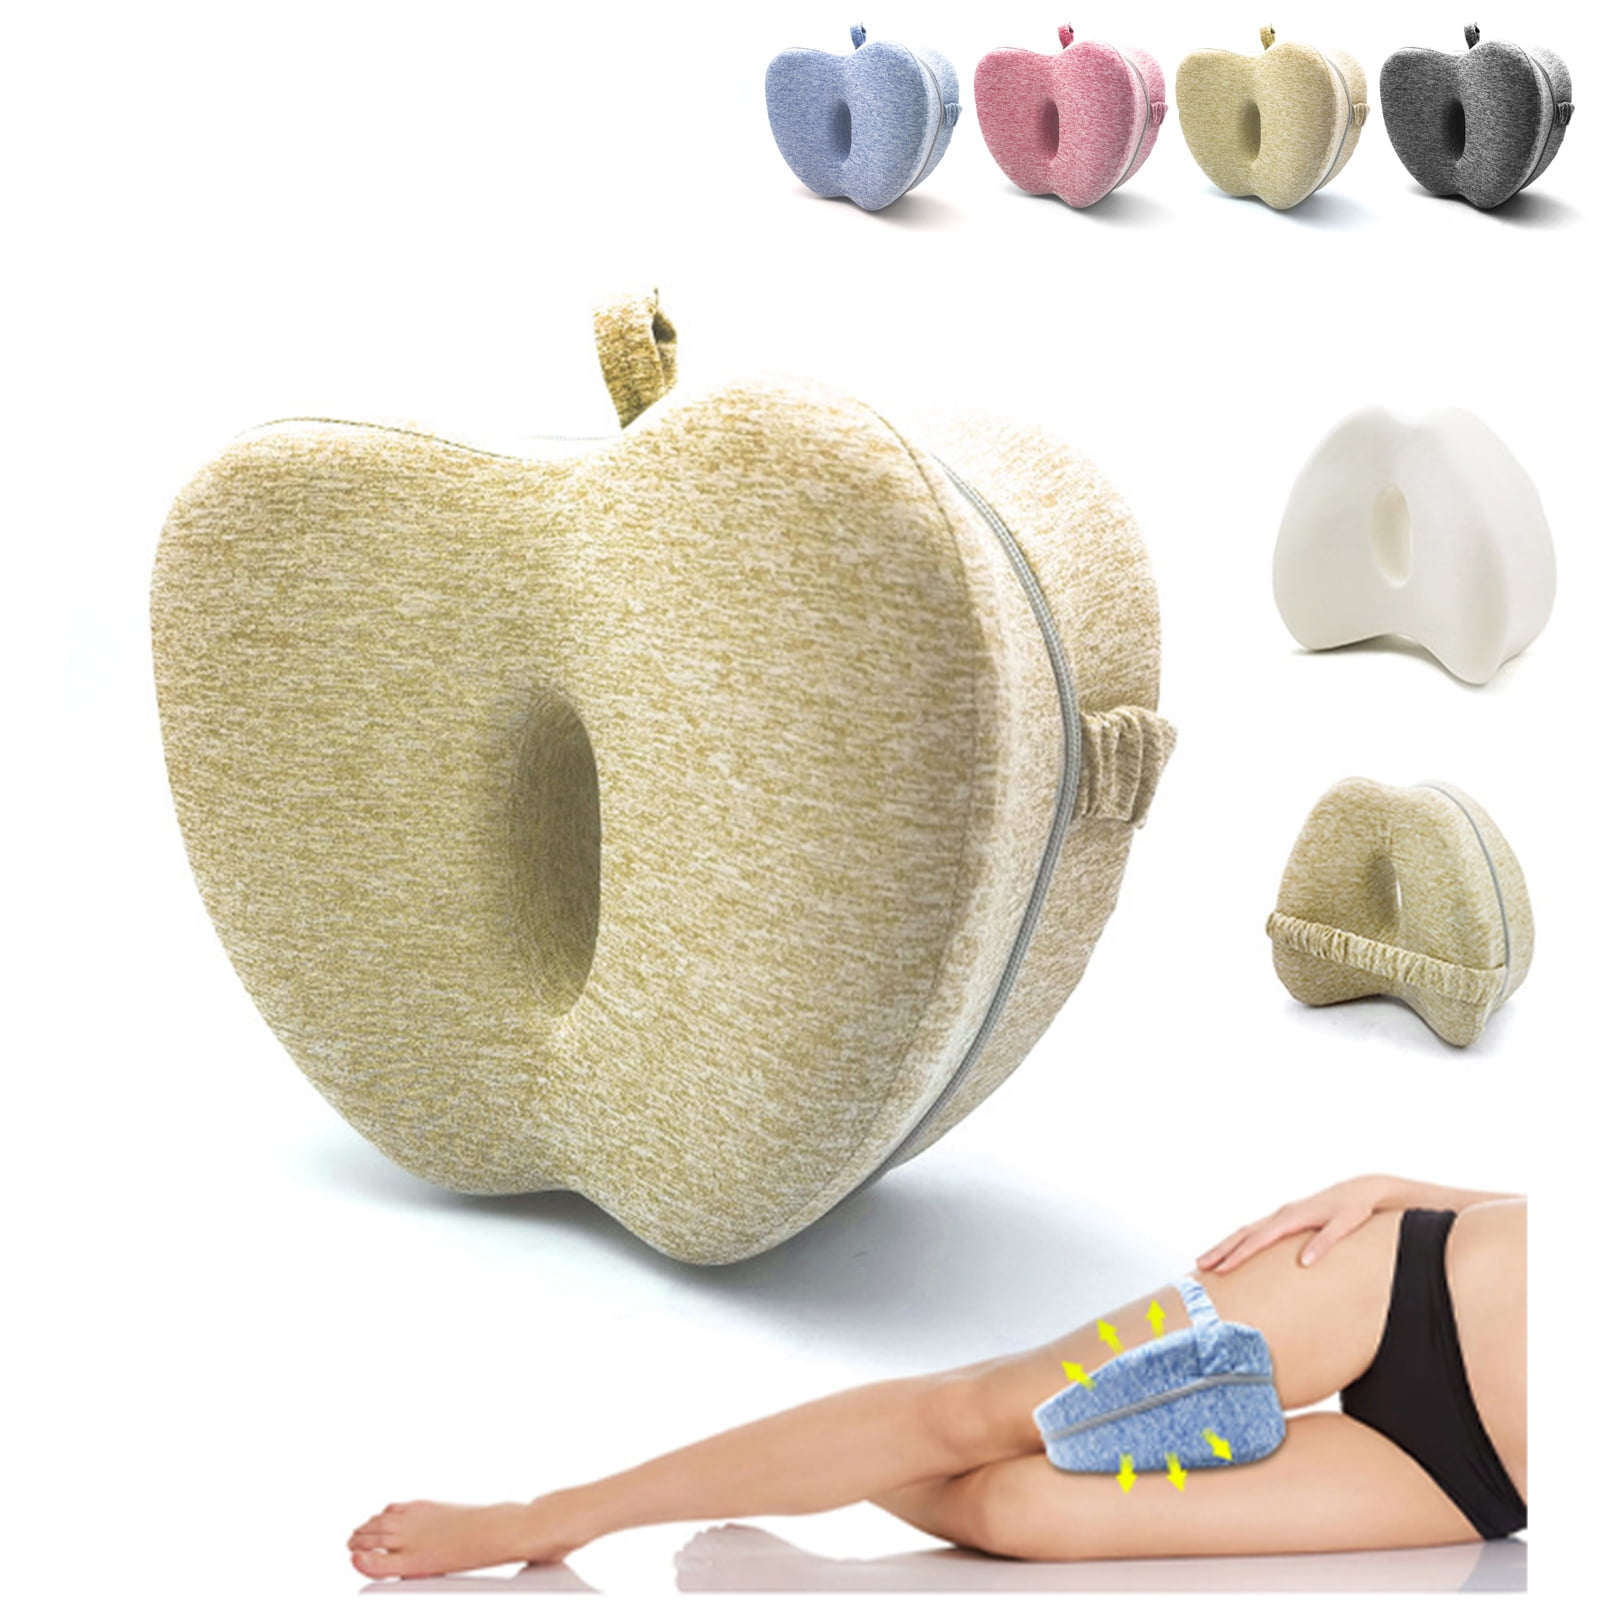 Smoothly Spine Alignment Pillow Relieve Hip Pain Sciatica Pillow